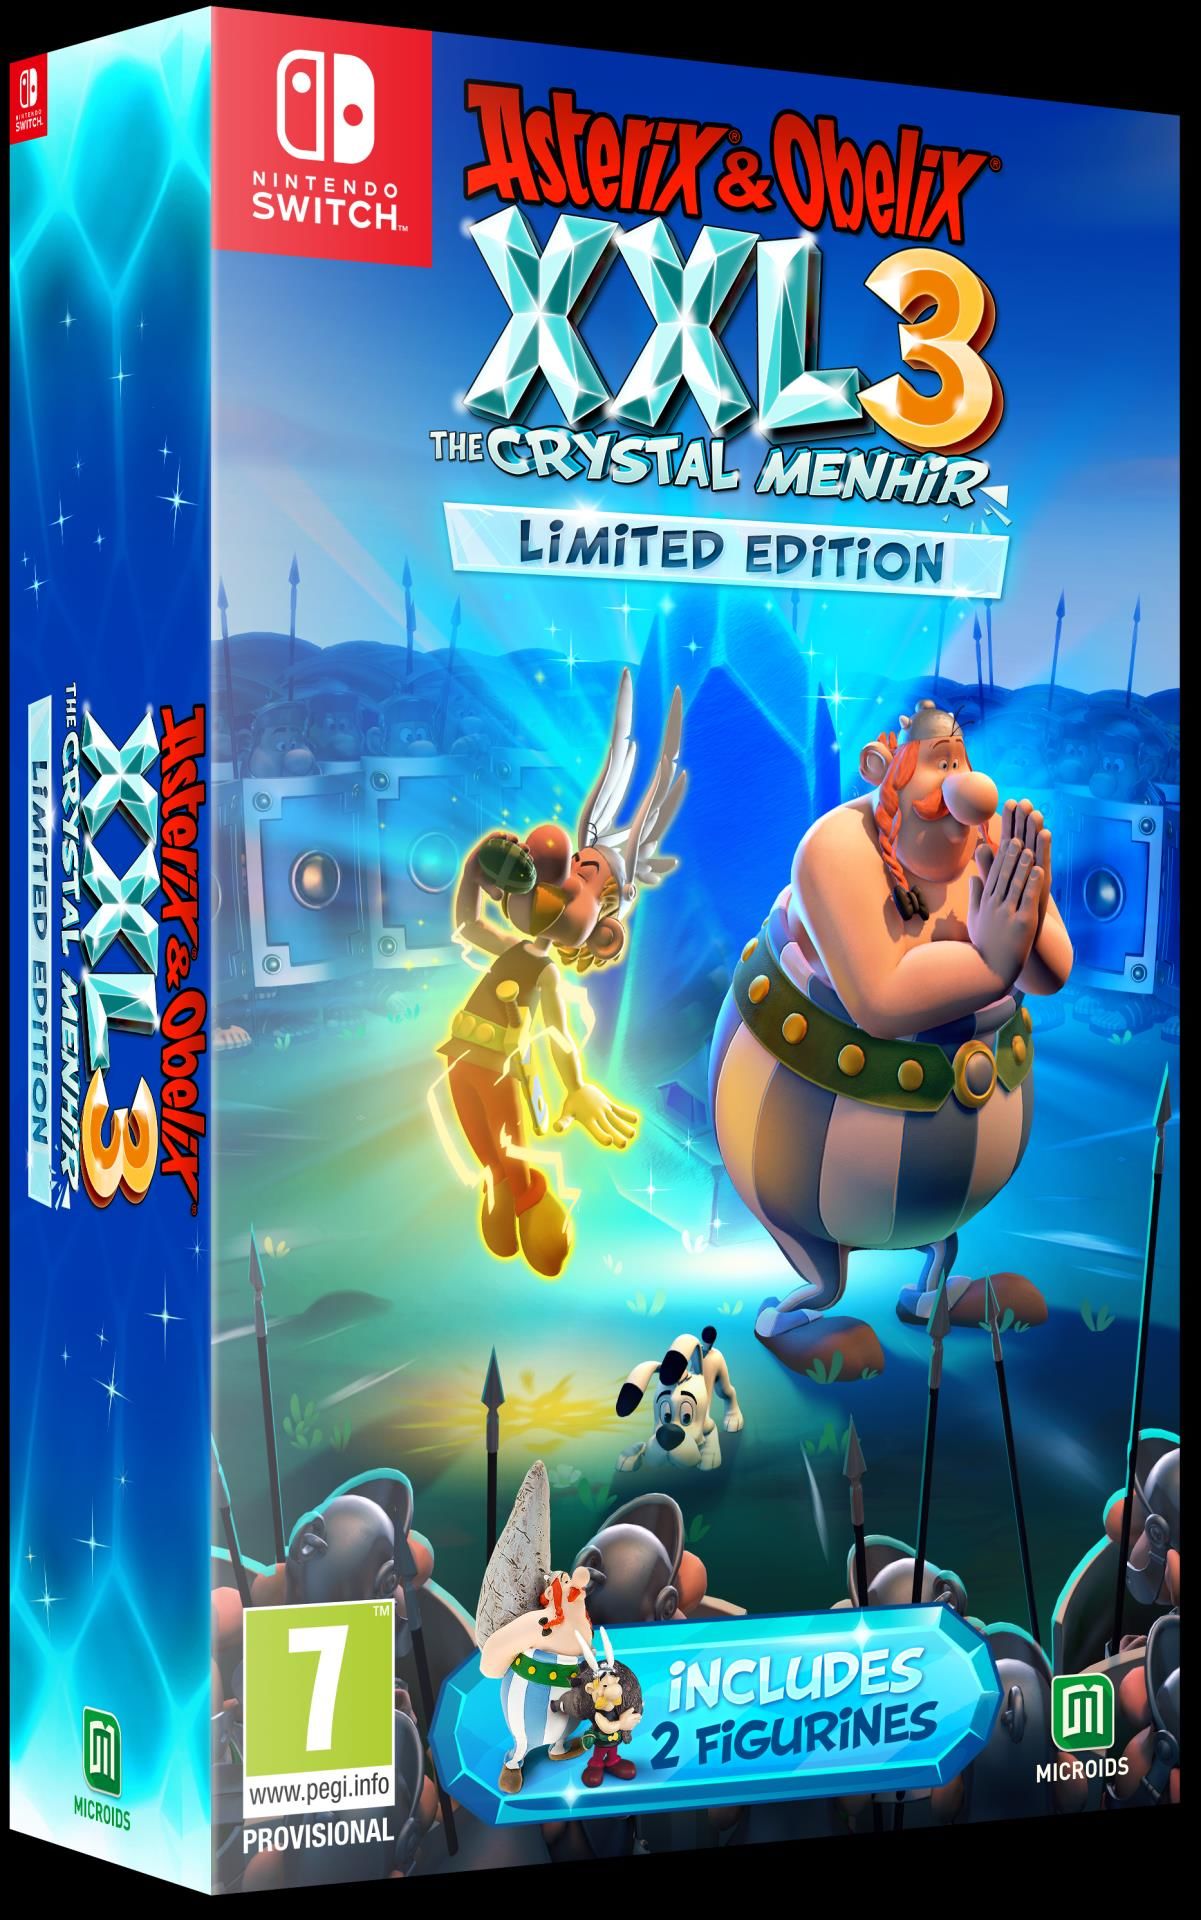 Asterix & Obelix XXL 3: The Crystal Menhir Limited Edition